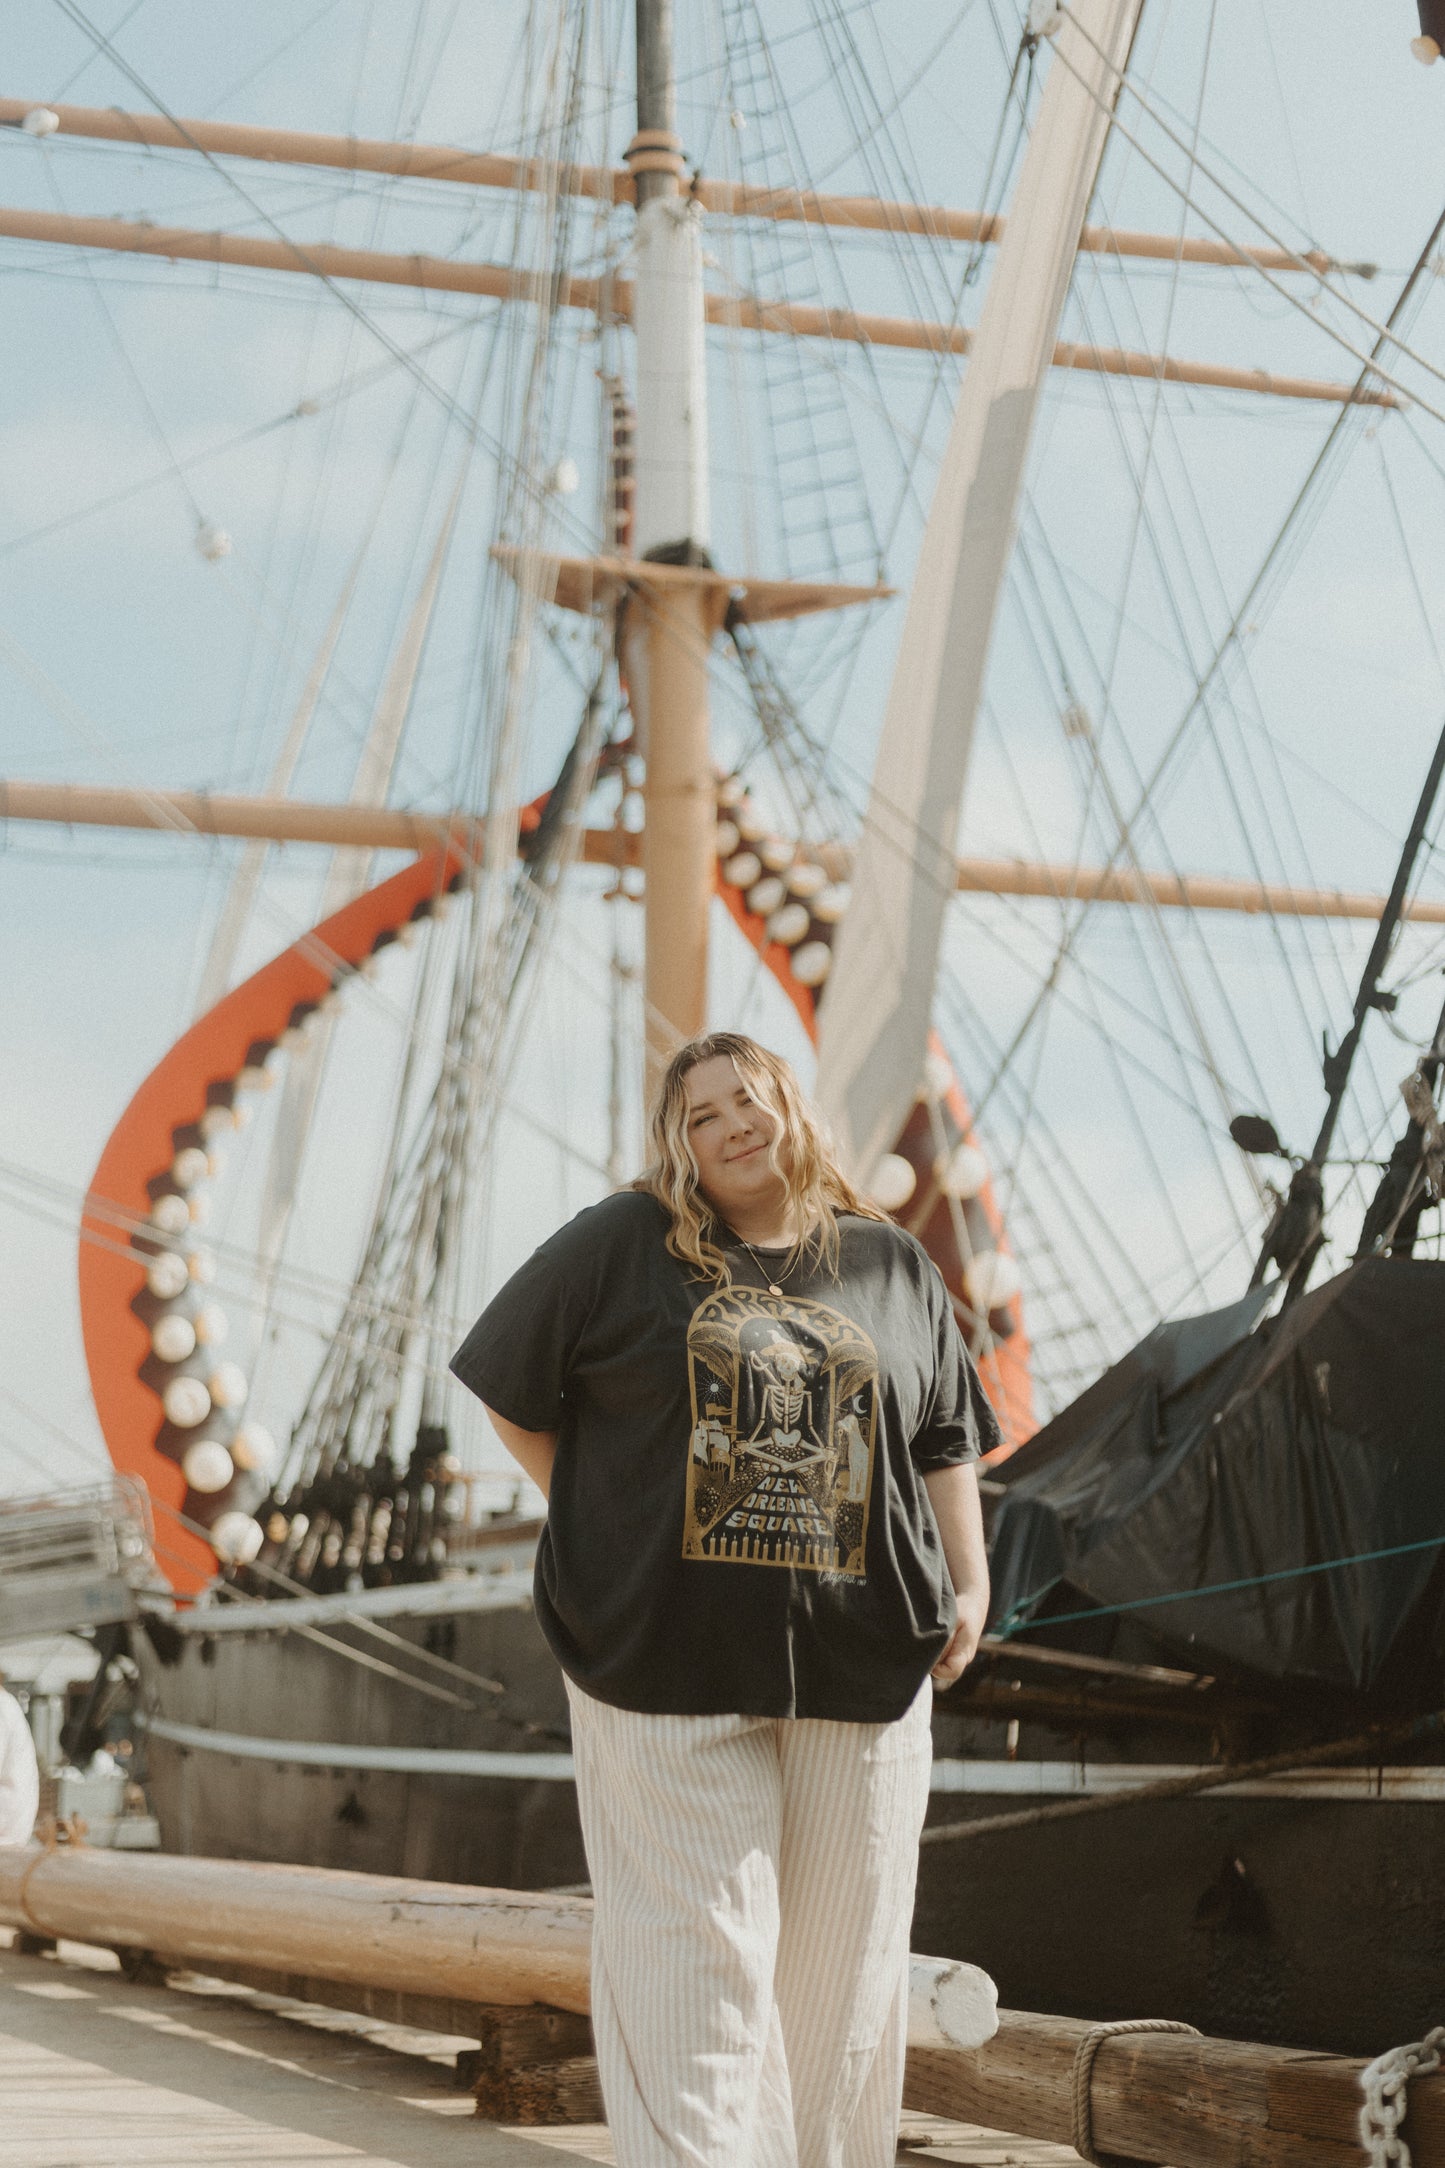 The Pirate Oversized Tee in Vintage Black